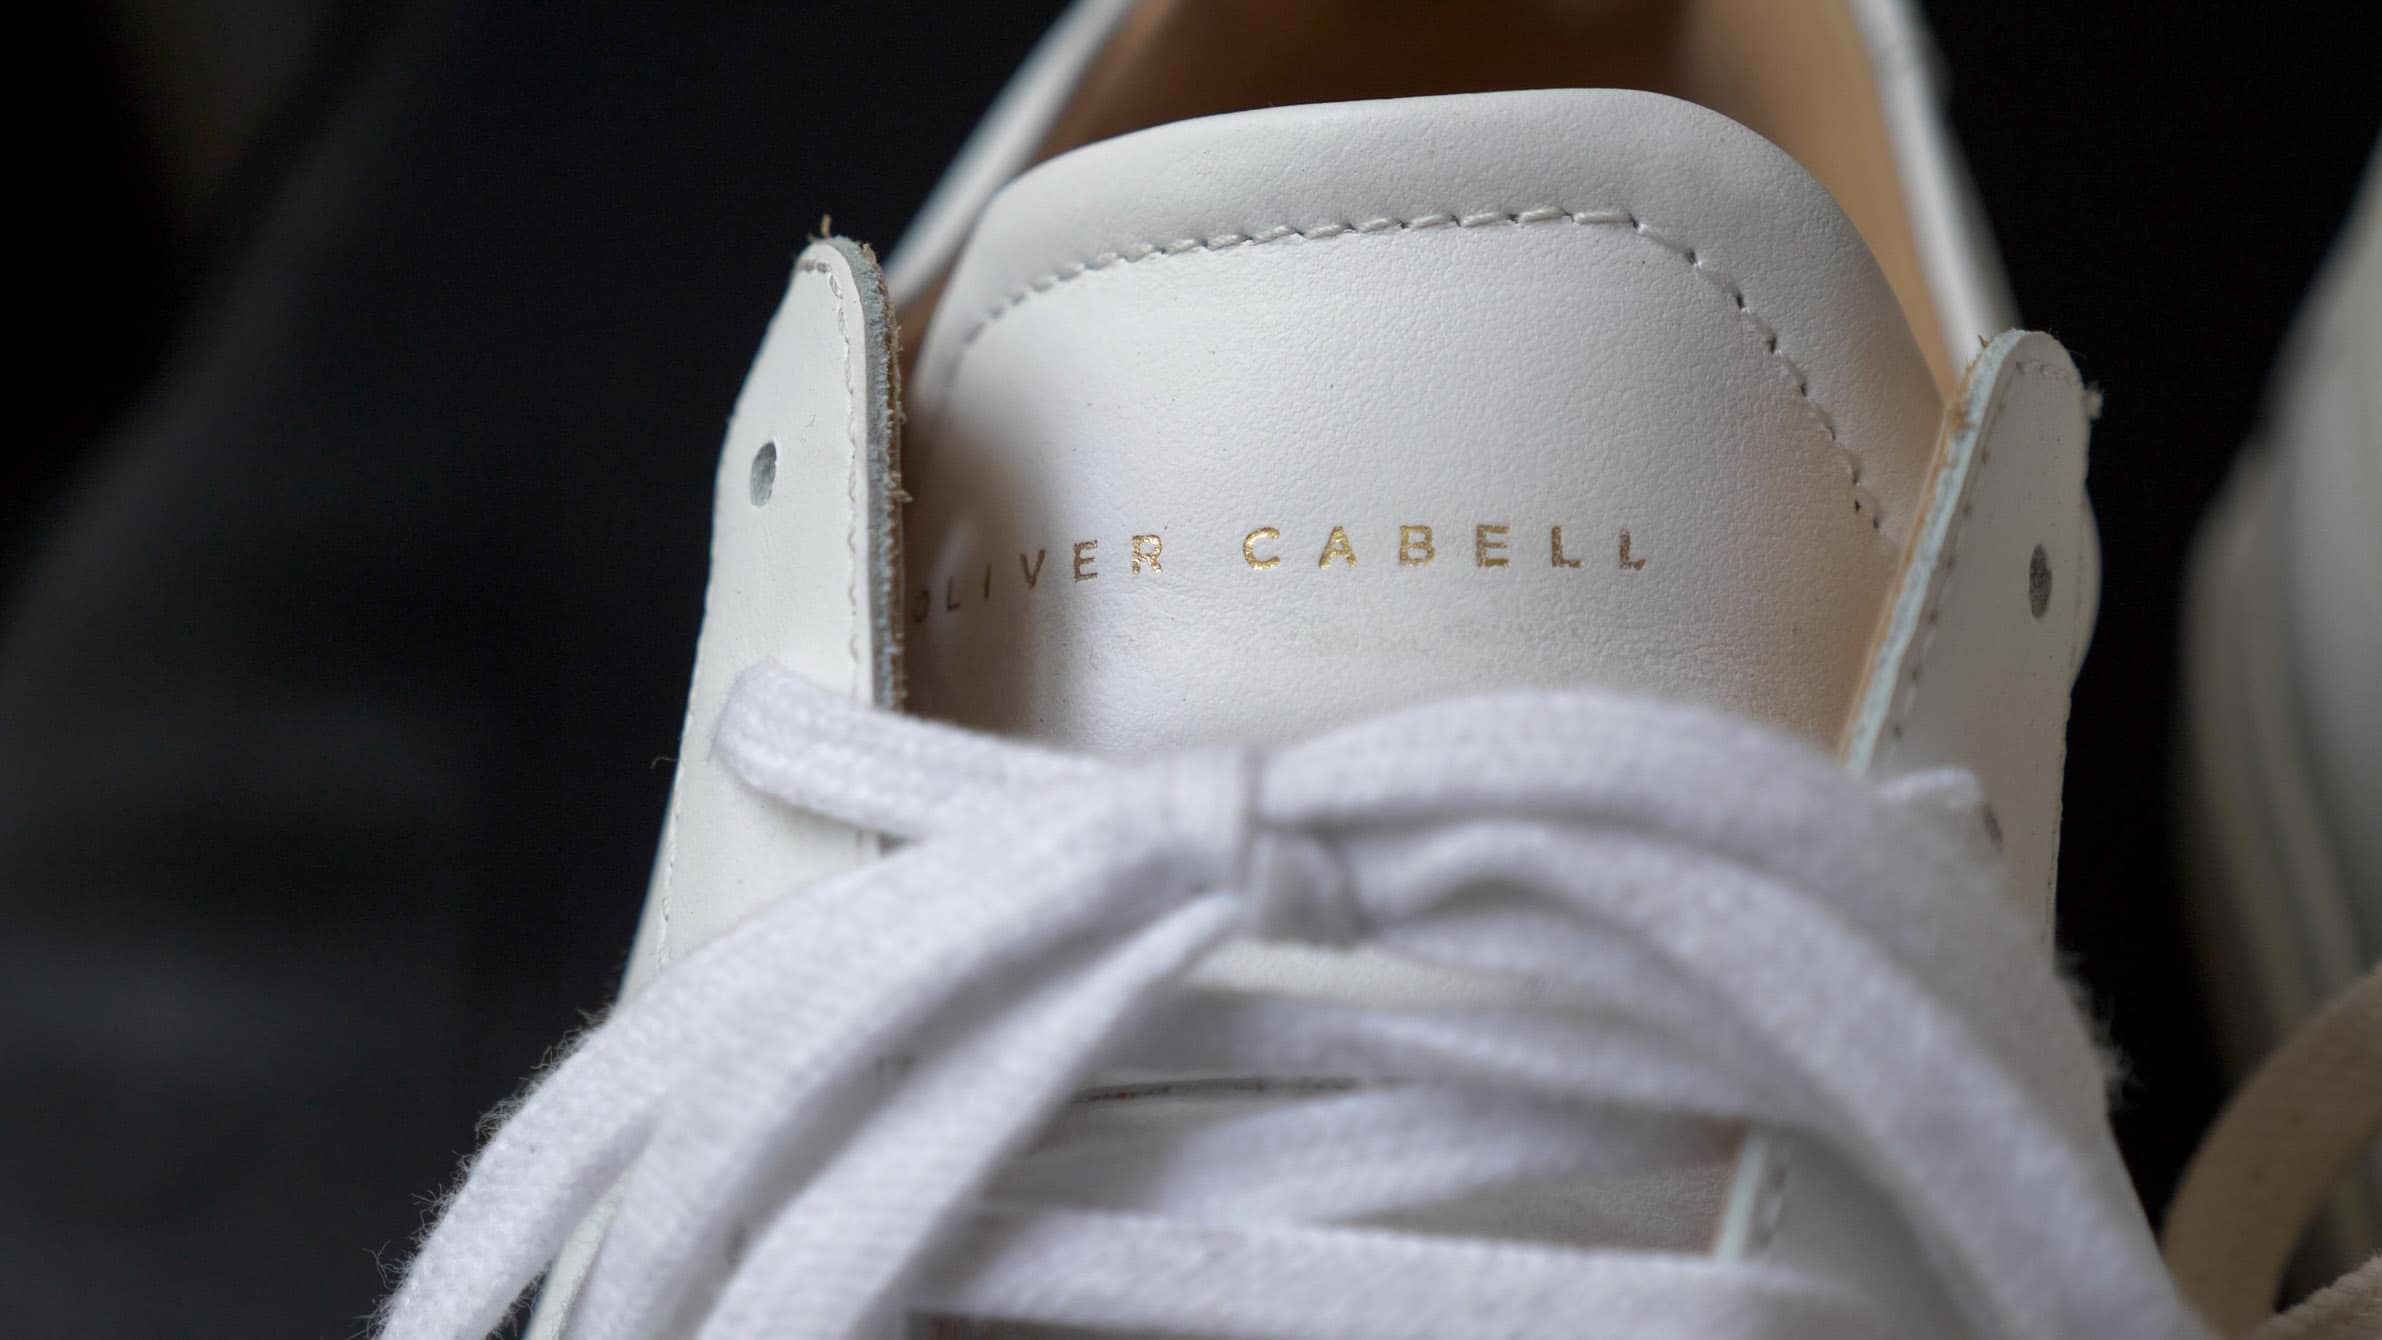 Oliver Cabell Review: Dream Flat, Dream Mule & Low 1 Sneaker